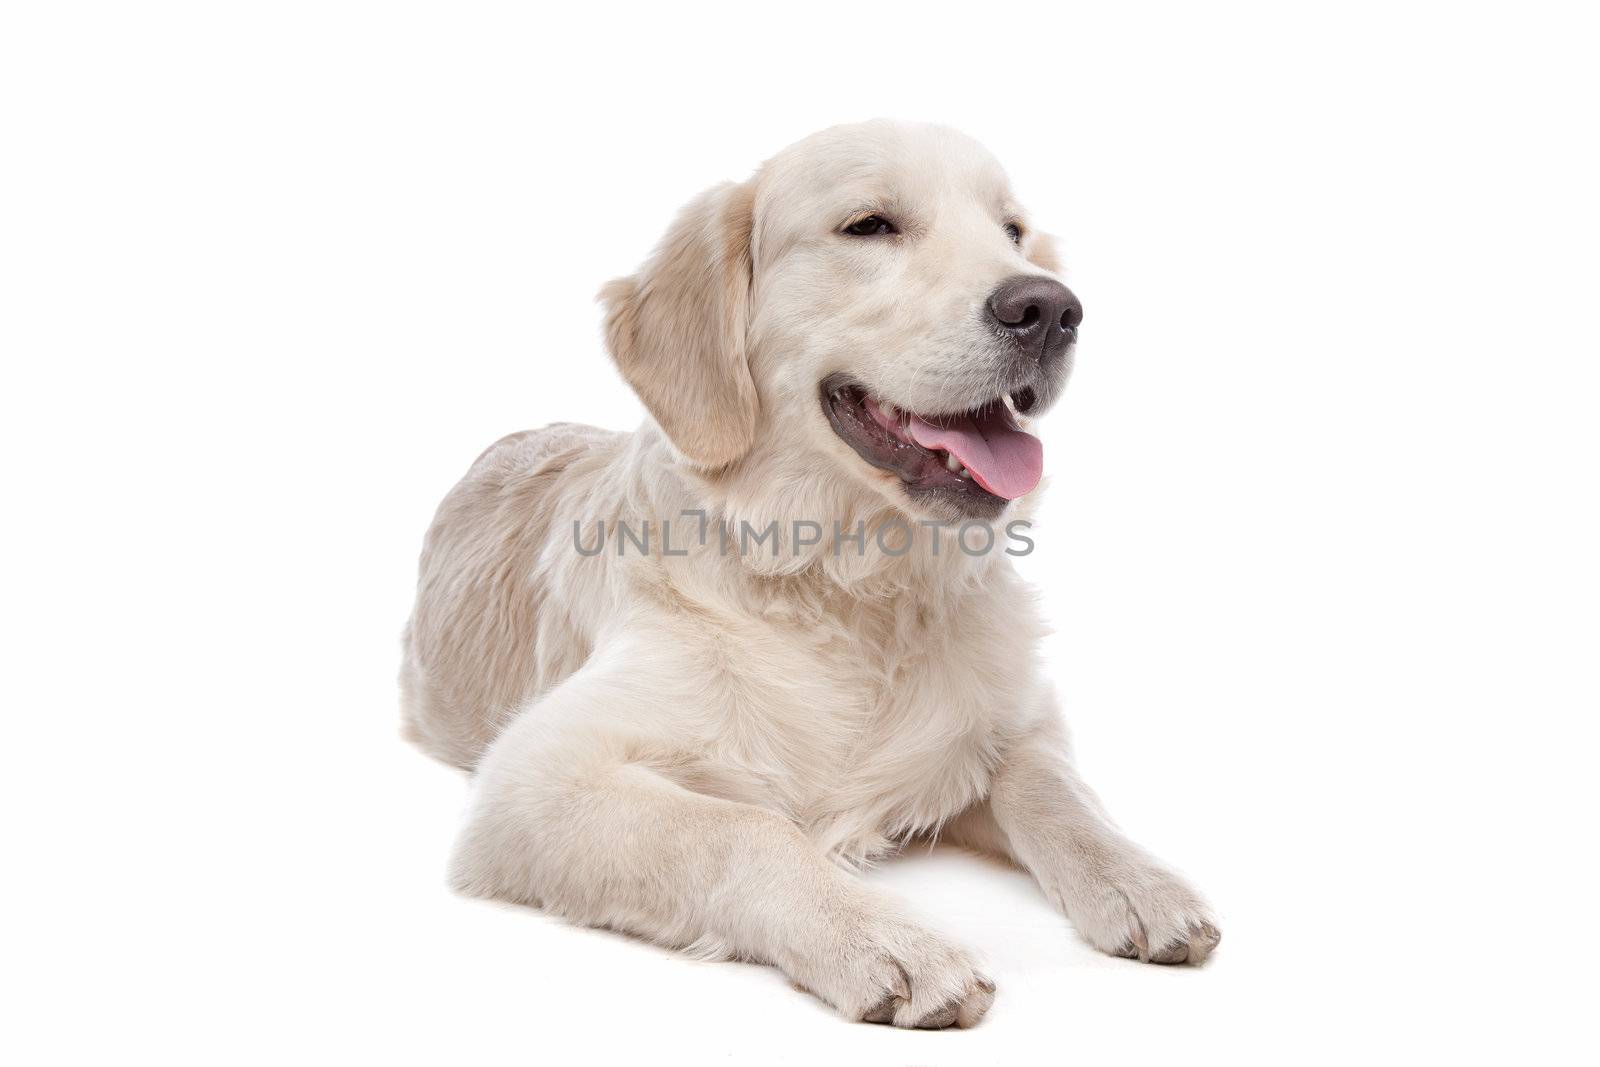 Golden retriever dog in front of a white background